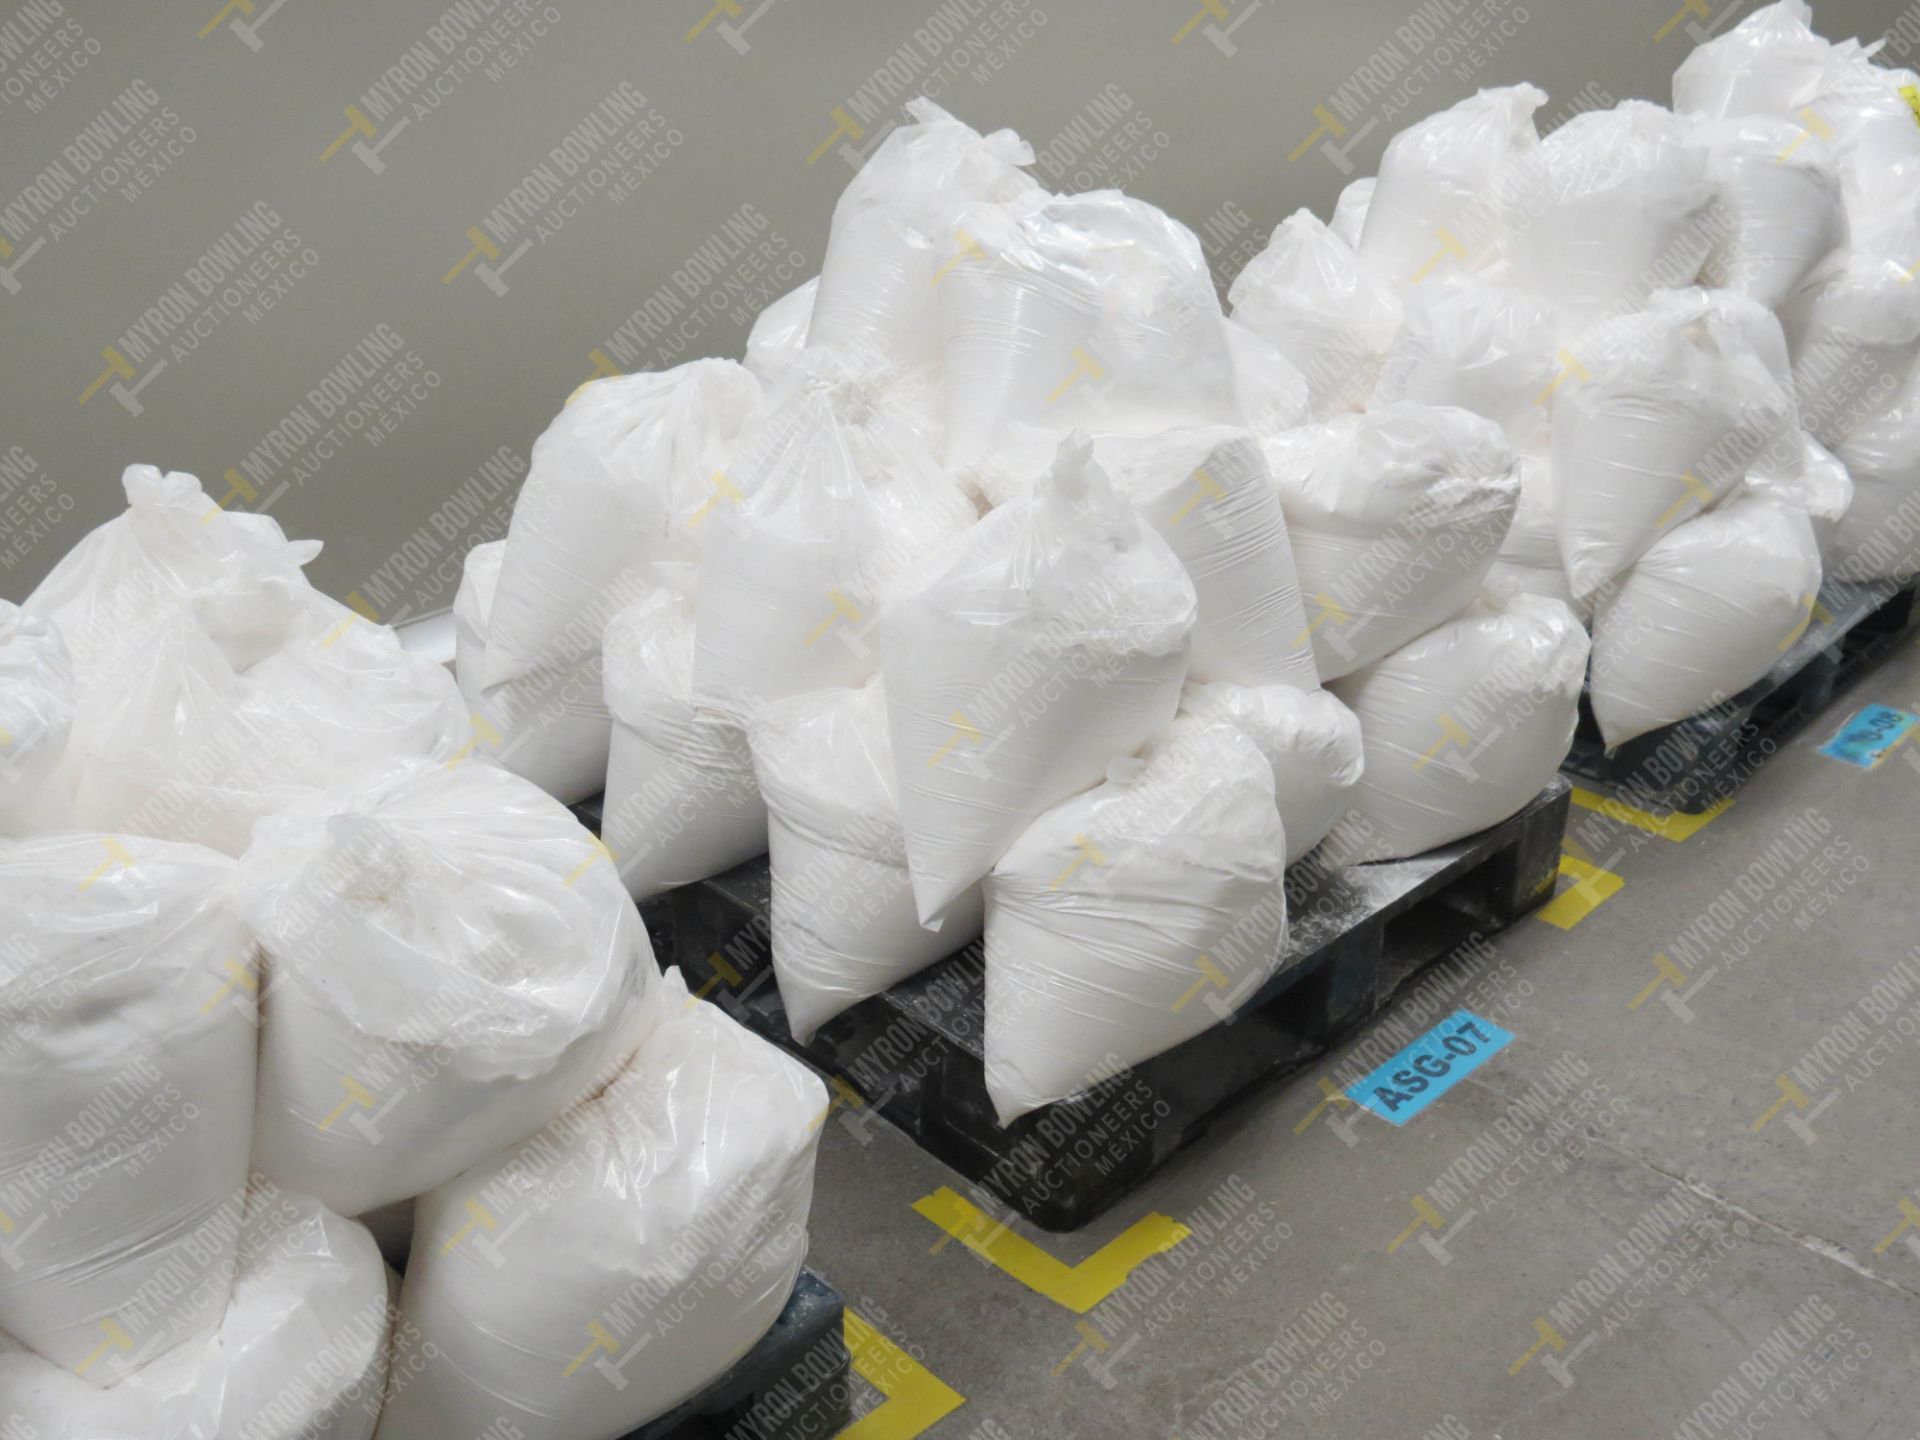 7 pallets of cassava starch sifted approximately 1.5 tons - Image 3 of 8